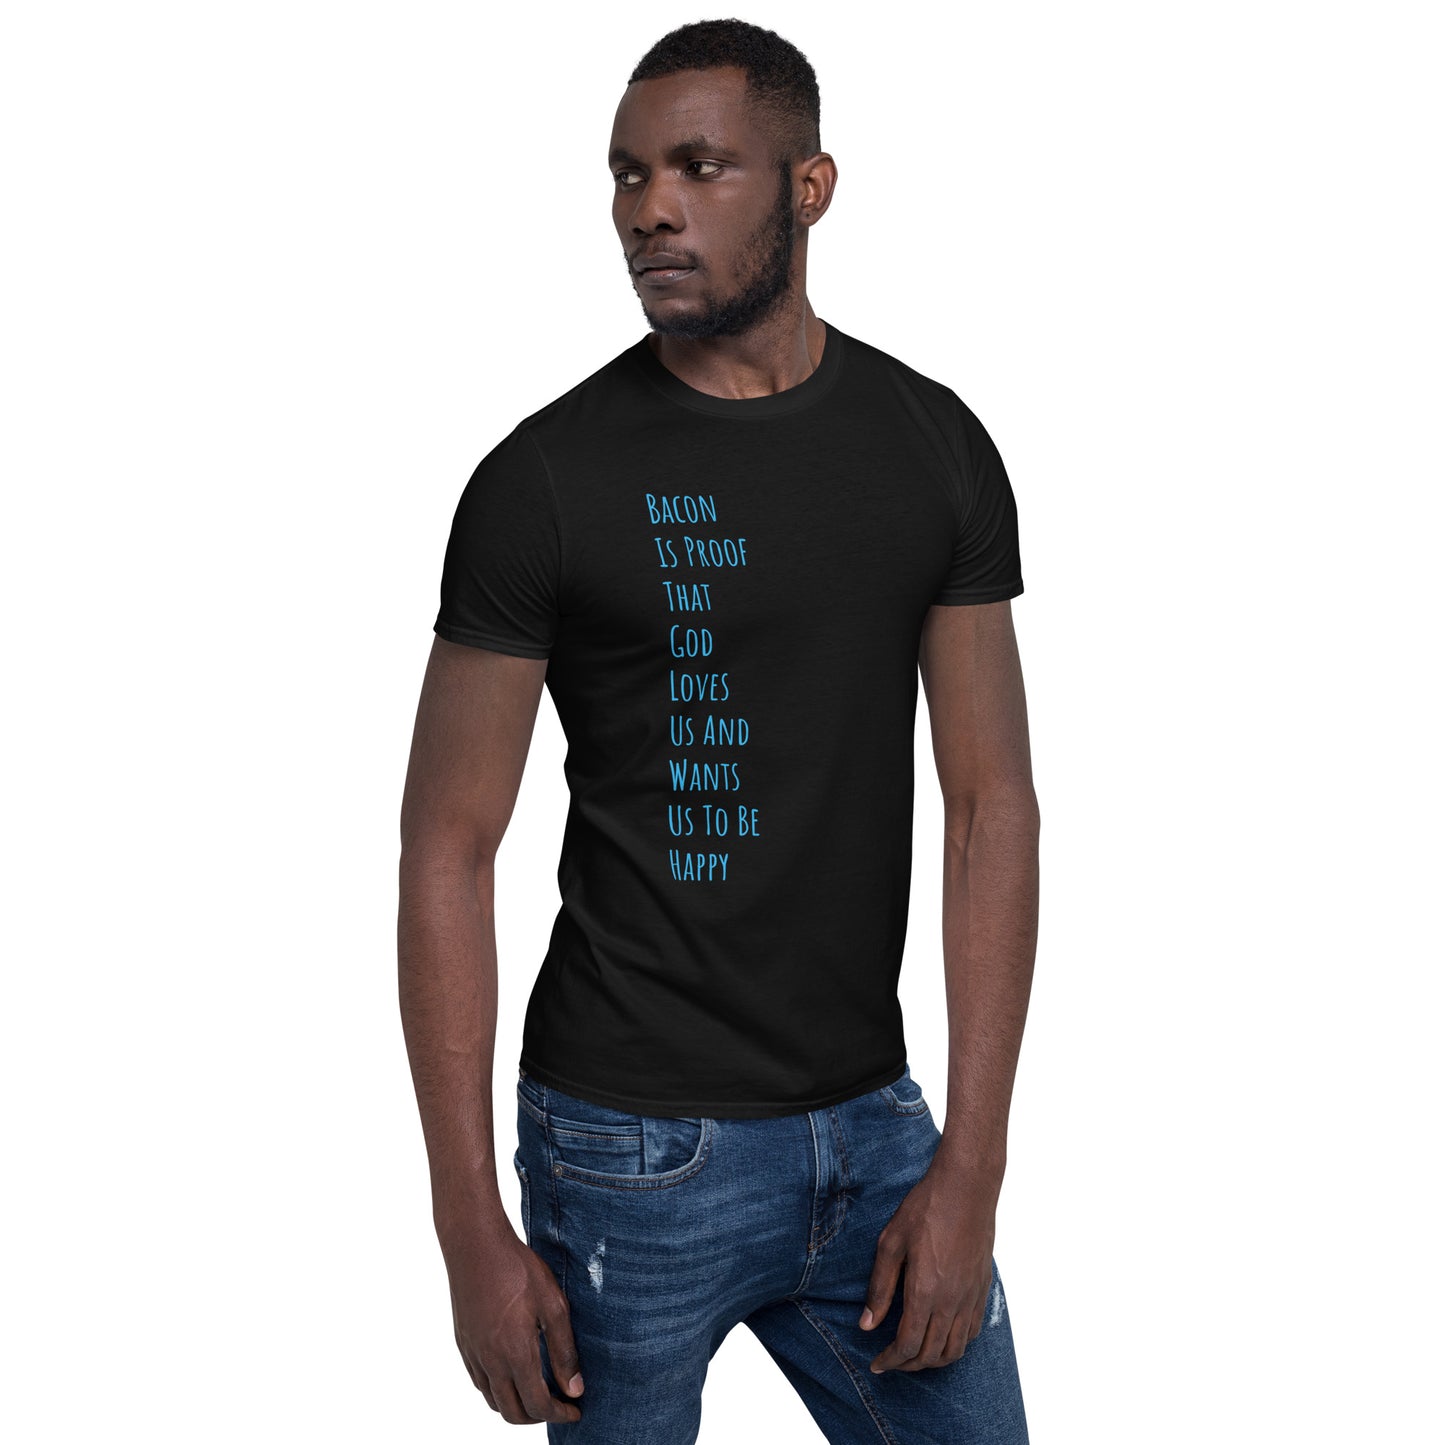 Aqua Bacon Is Proof That God Loves Us And Wants Us To Be Happy T-Shirt black right side